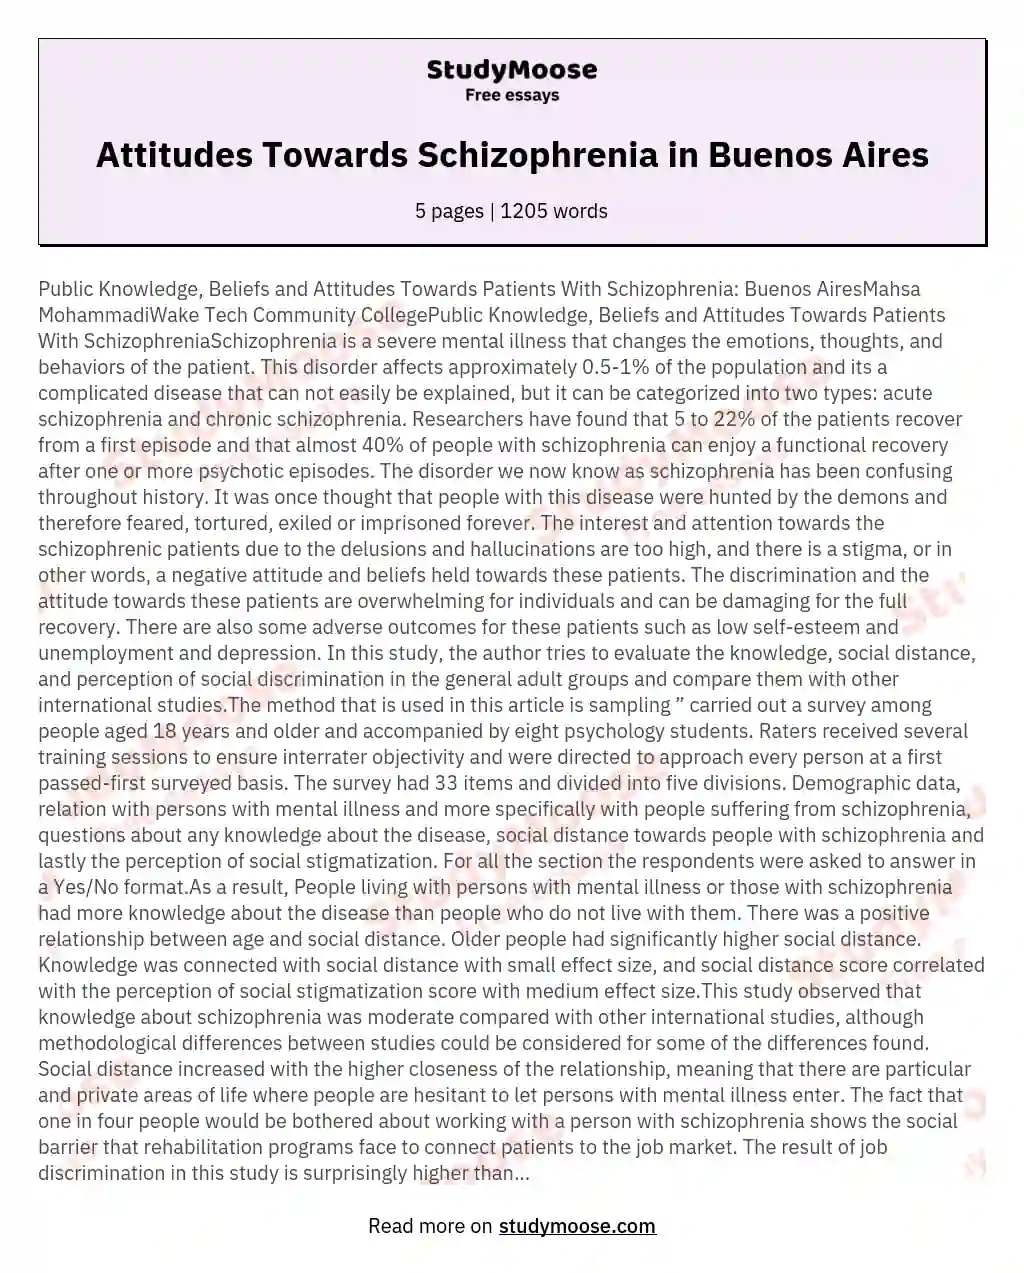 Public Knowledge Beliefs and Attitudes Towards Patients With Schizophrenia Buenos AiresMahsa MohammadiWake